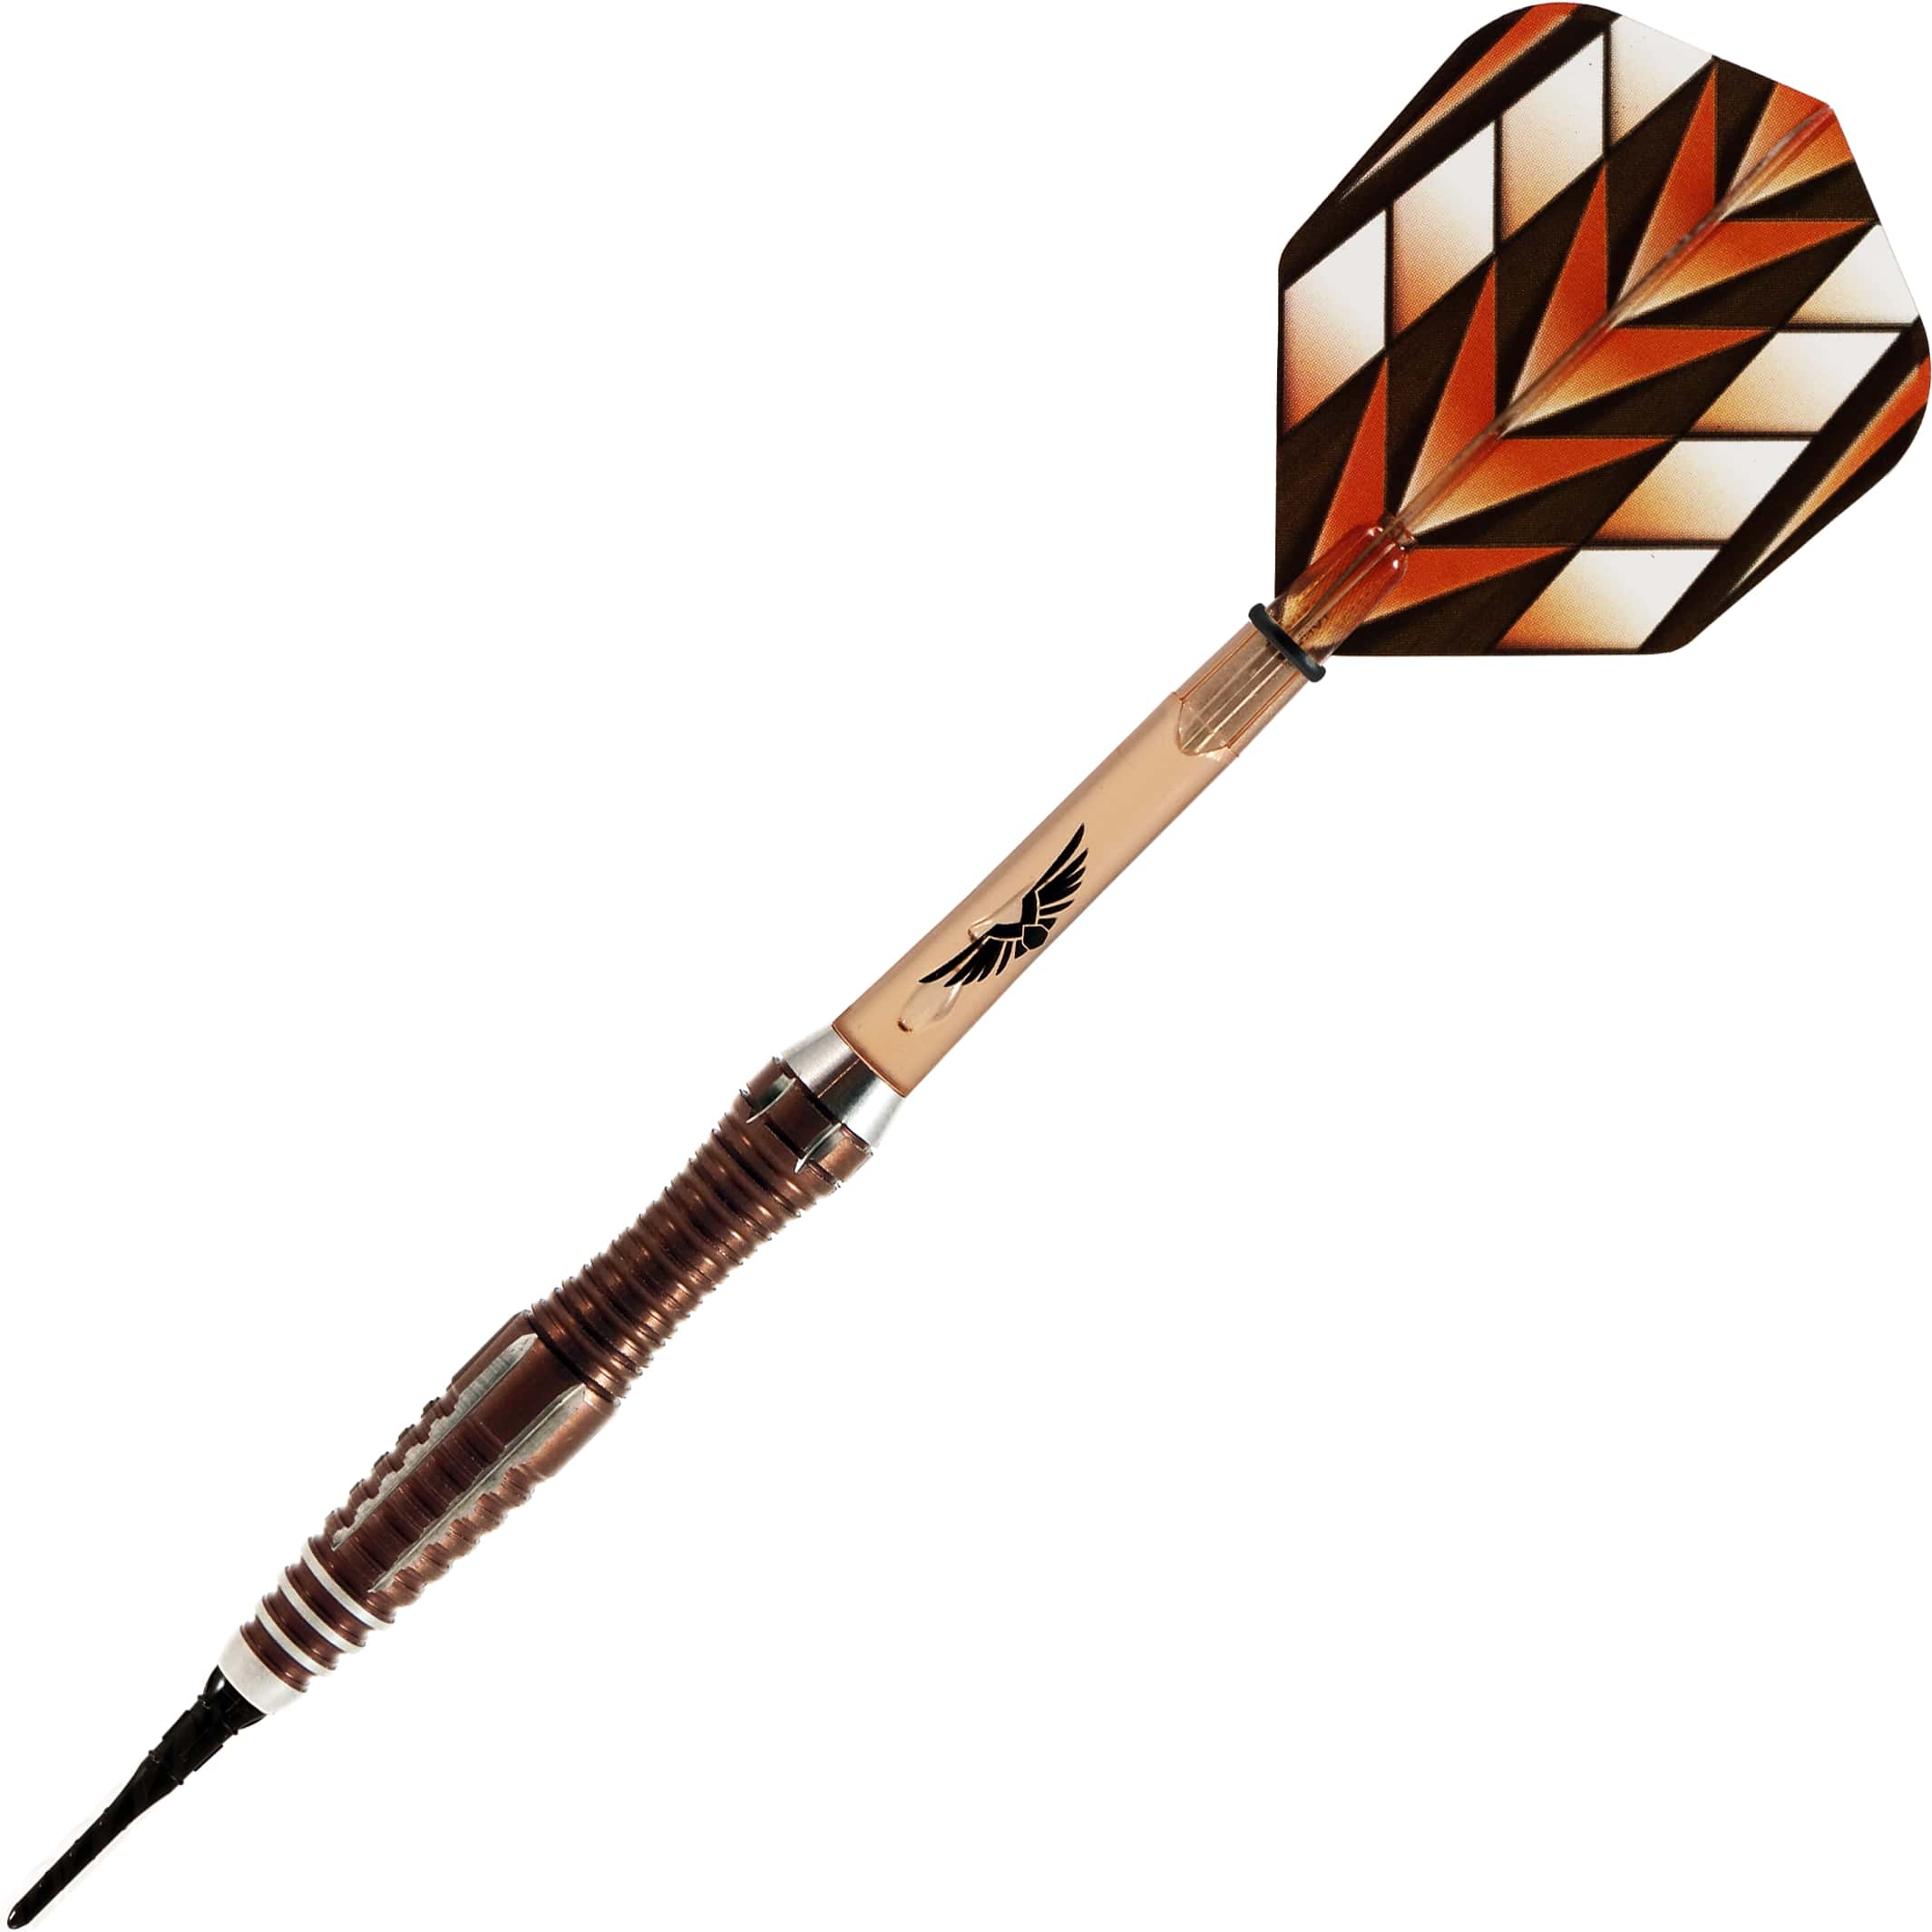 Shot Tribal Weapon 1 Soft Tip Darts - Front Weighted 19gm